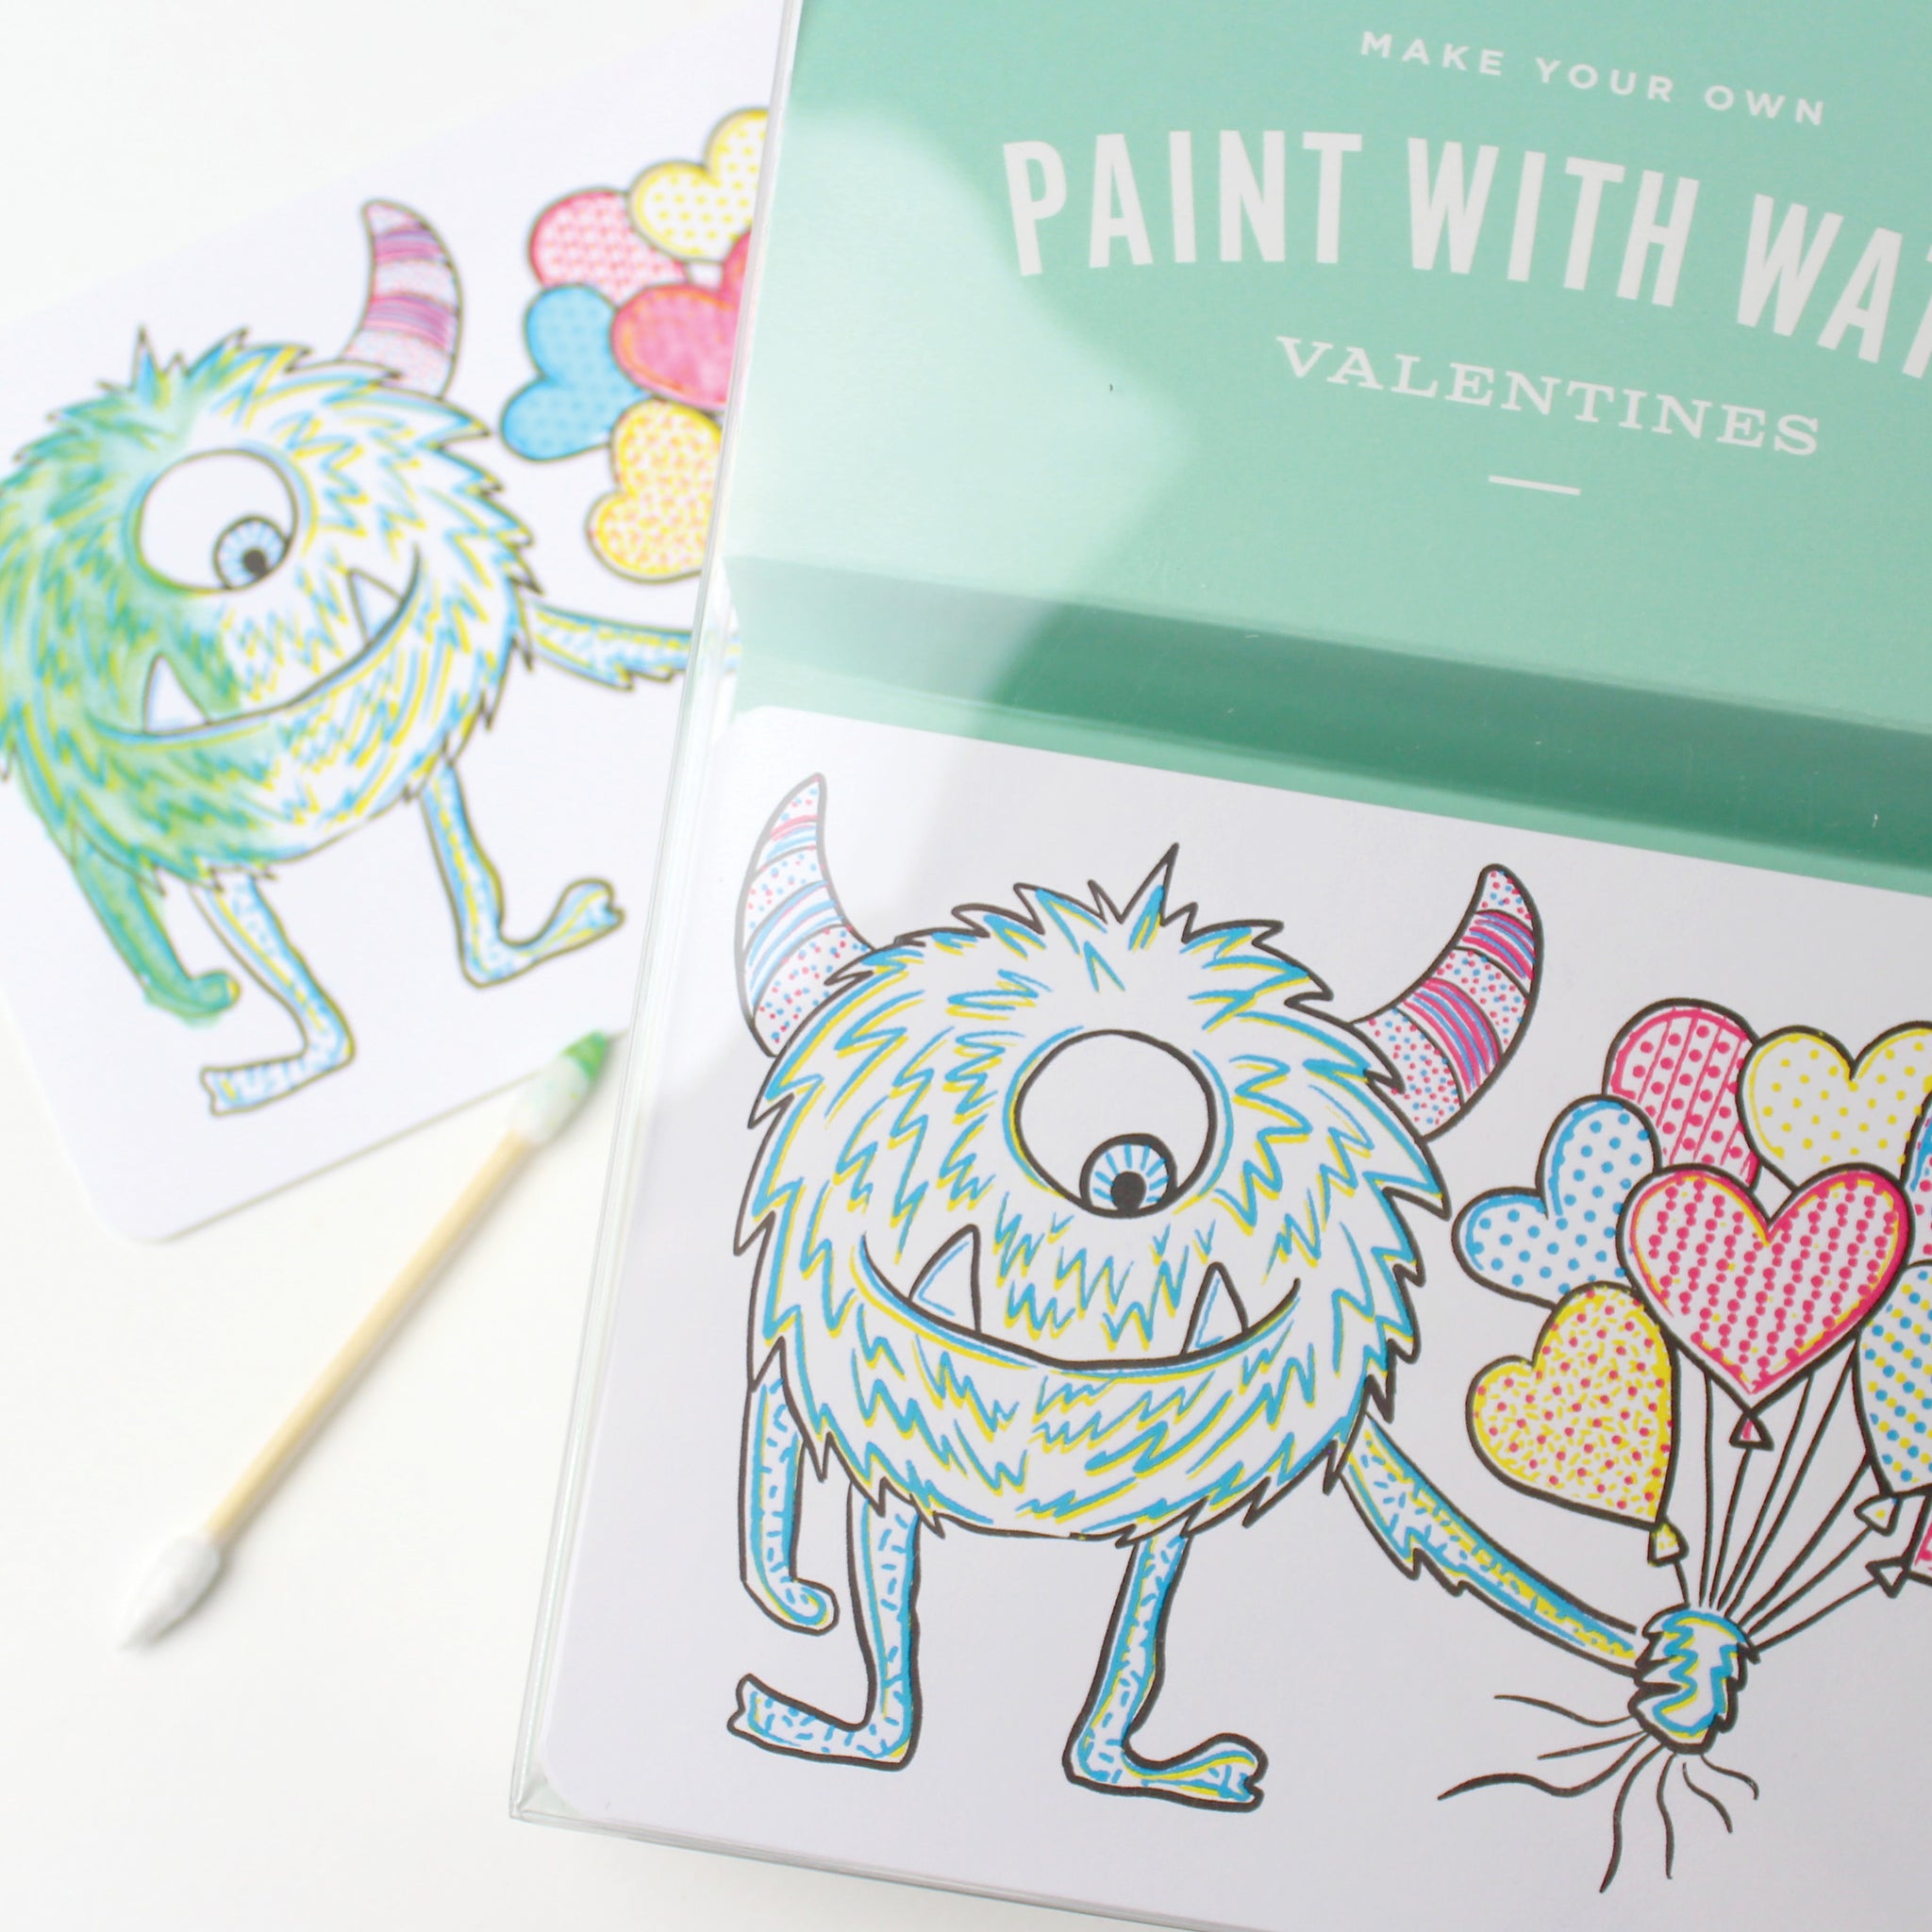 Paint with Water Valentines - Monster – Inklings Paperie